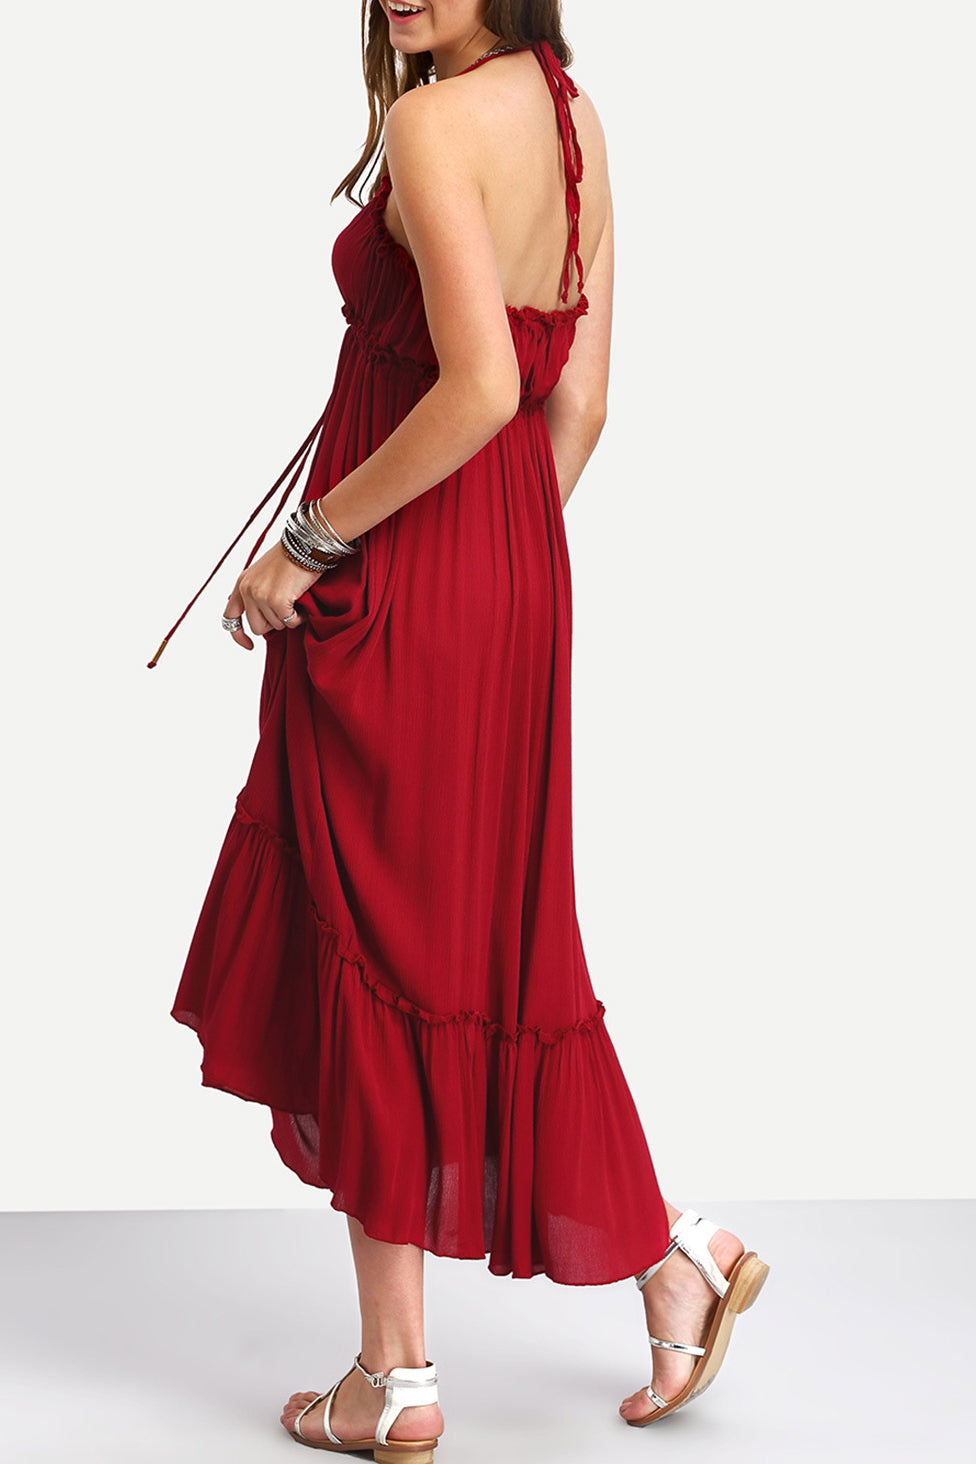 Pure Color Spaghetti Straps Sleeveless Long Party Dress